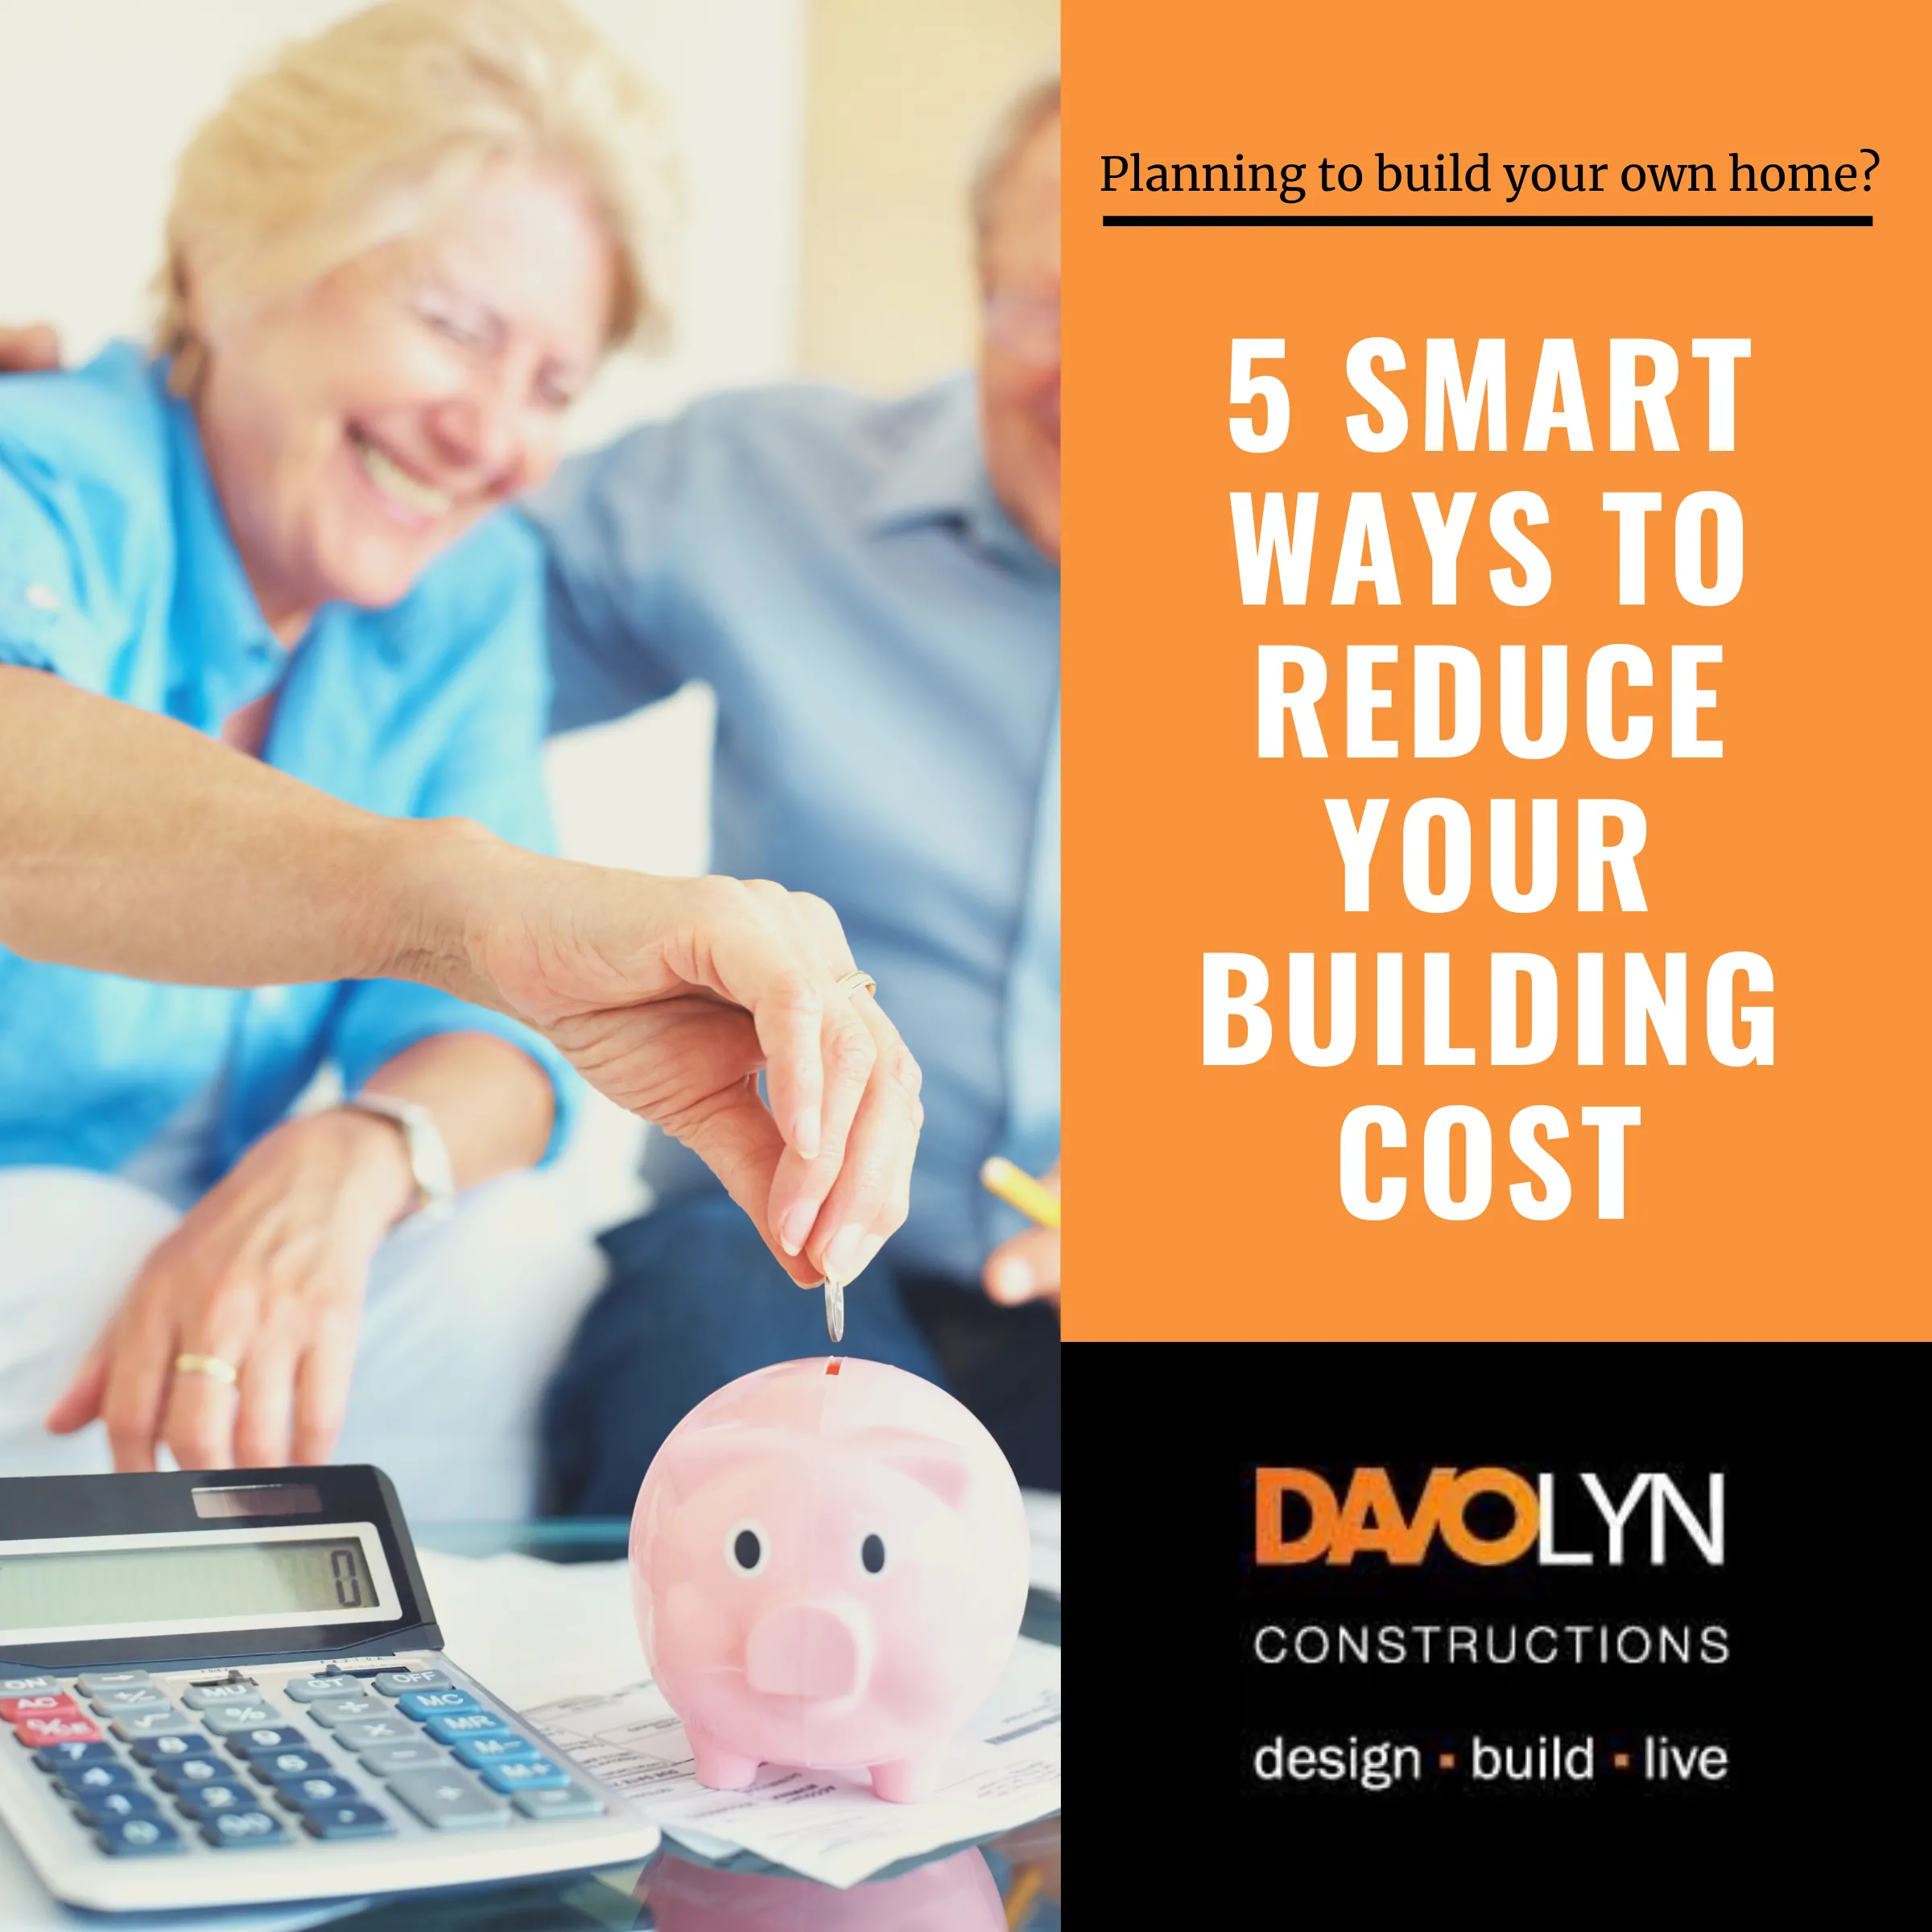 5 Smart Ways to Reduce Your Building Cost